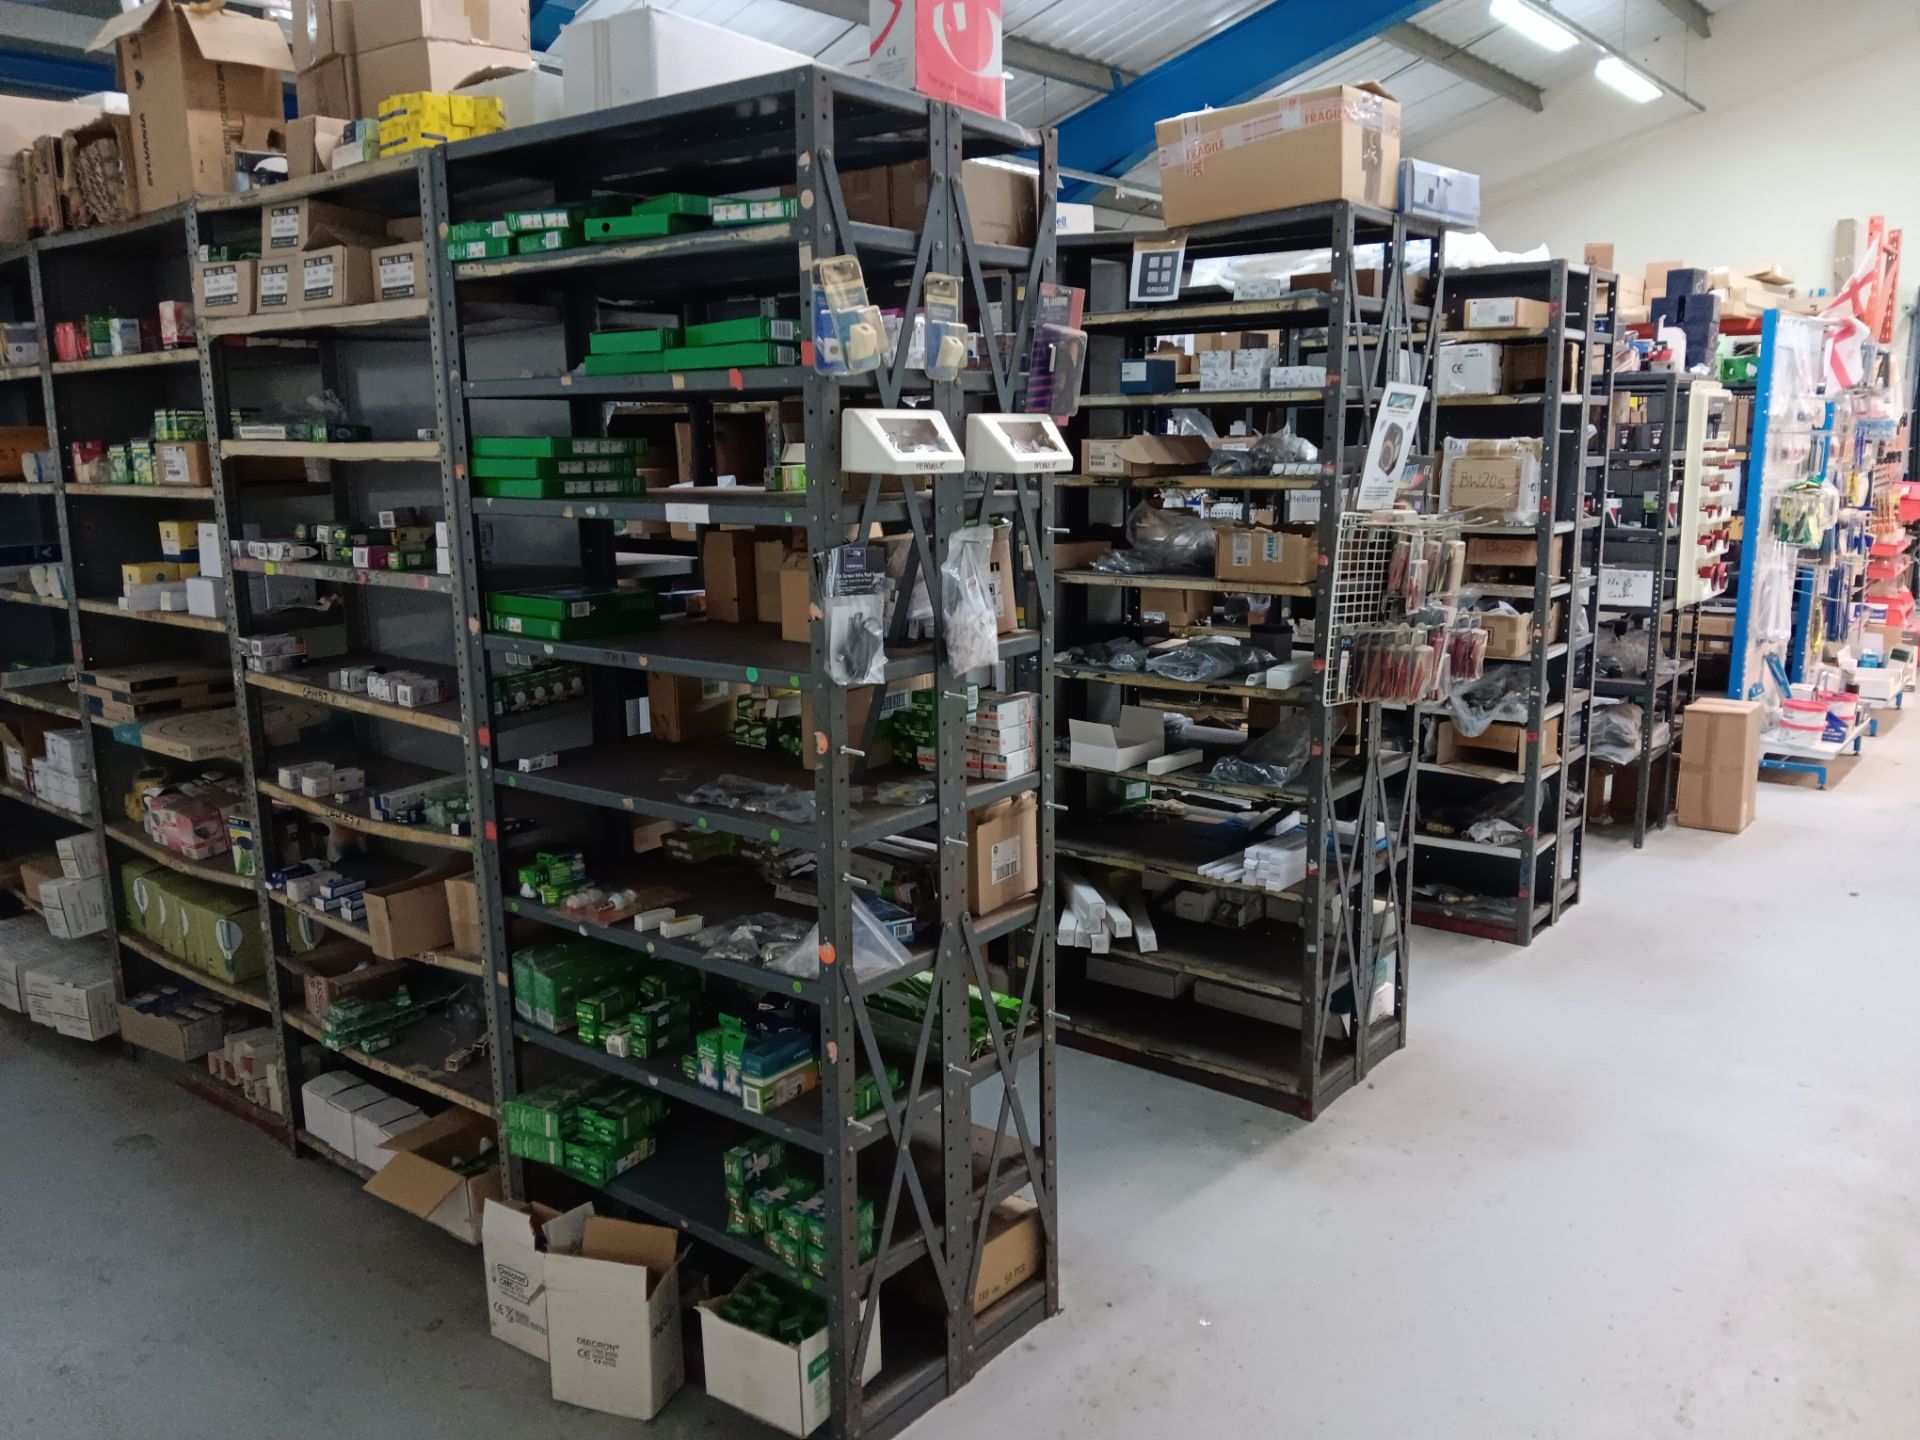 79 x Bays of Assorted Metal Storage Shelving (Not Contents) – Buyer to Dismantle